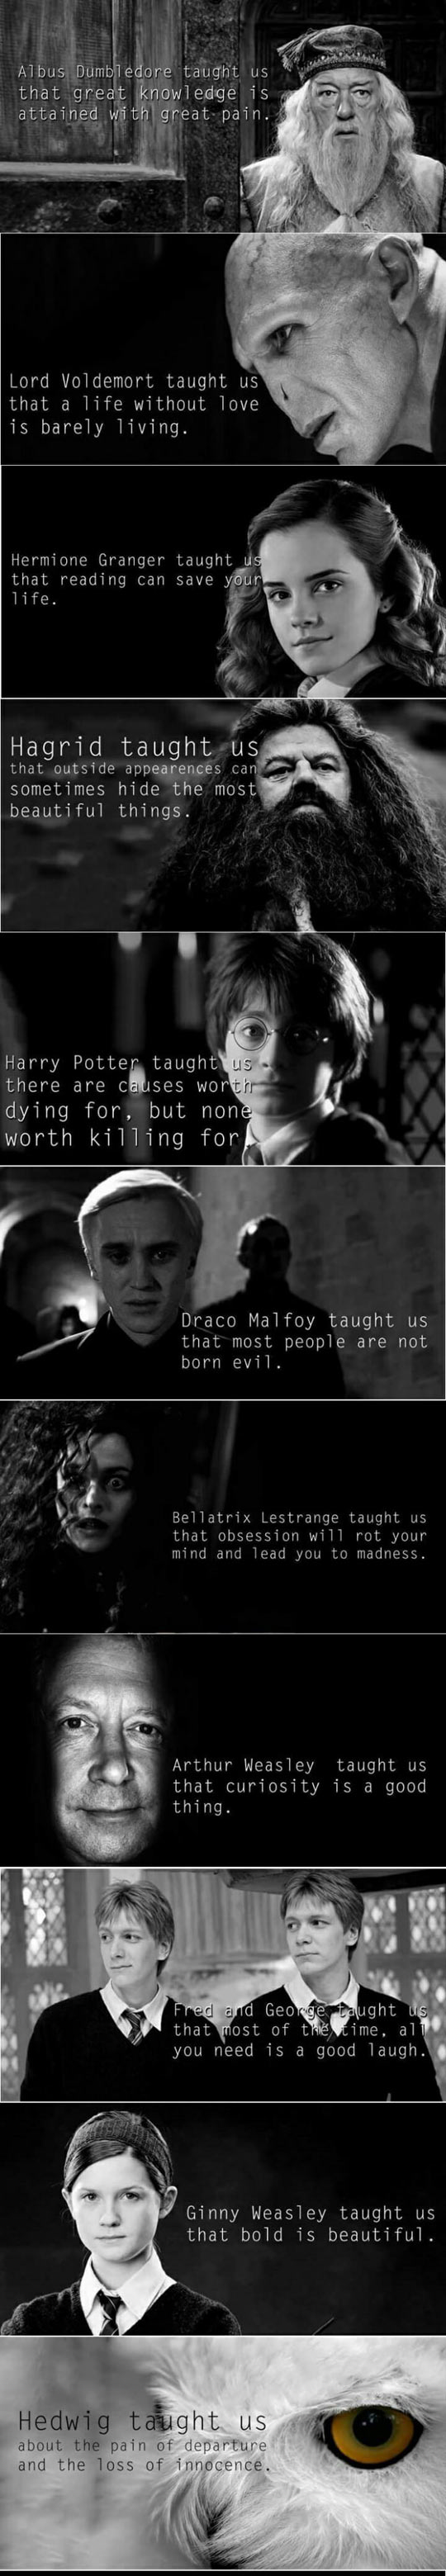 The many lessons of Harry Potter